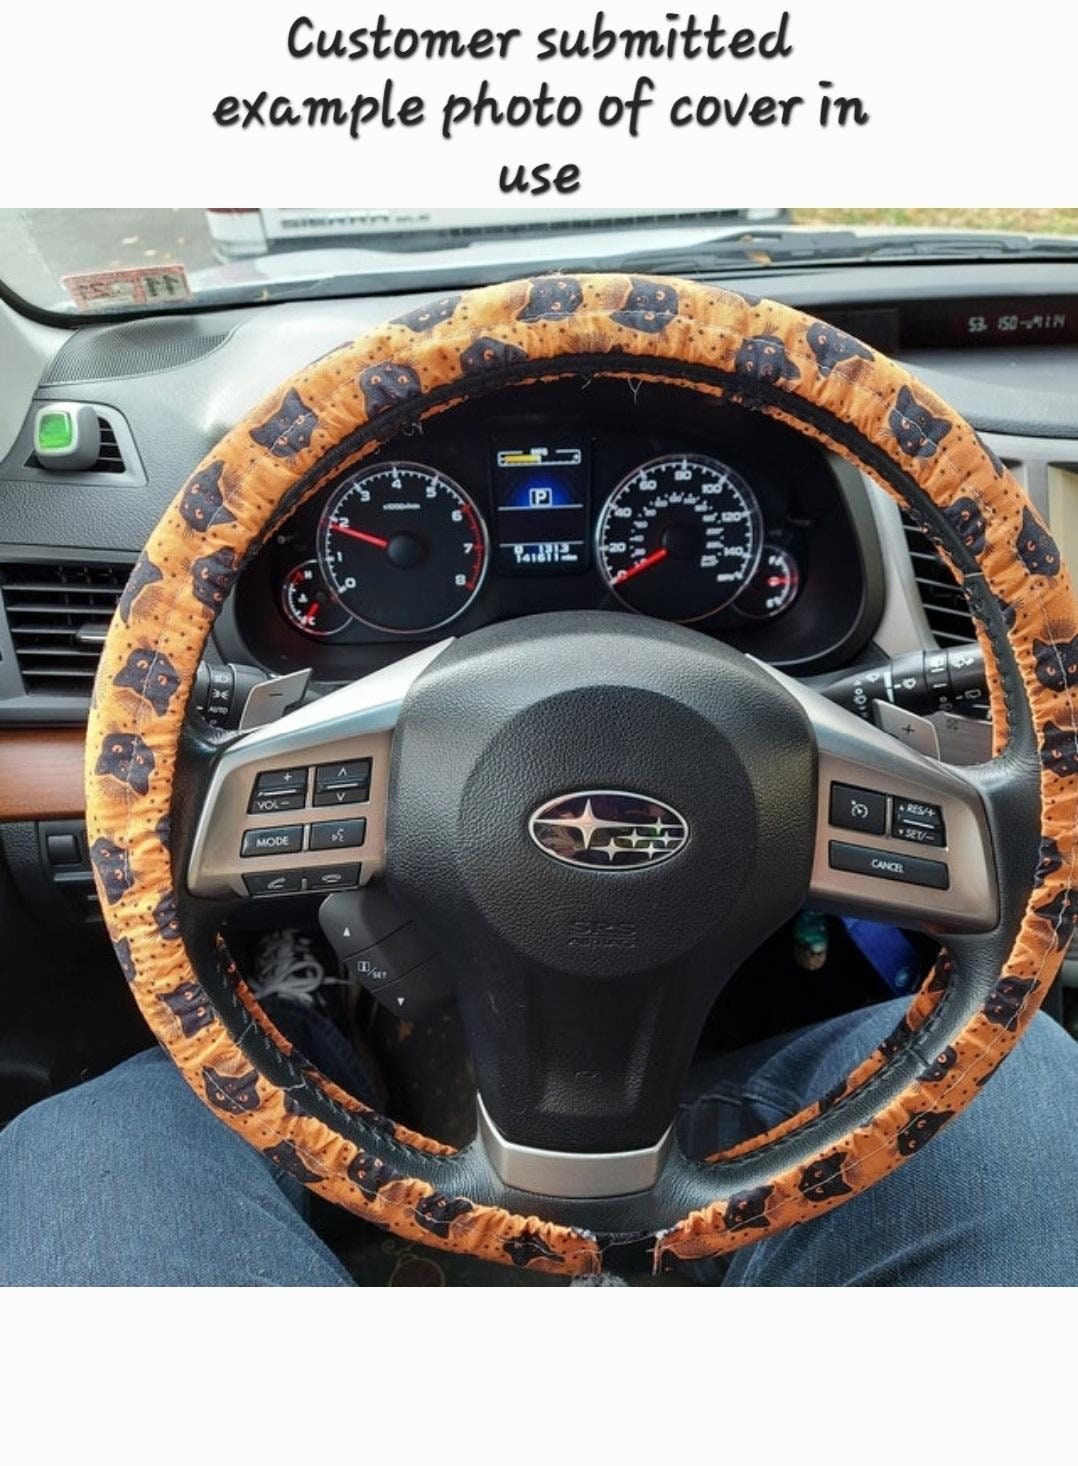 Jack NBC Steering Wheel Cover made with Licensed Disney Fabric - Harlow's Store and Garden Gifts